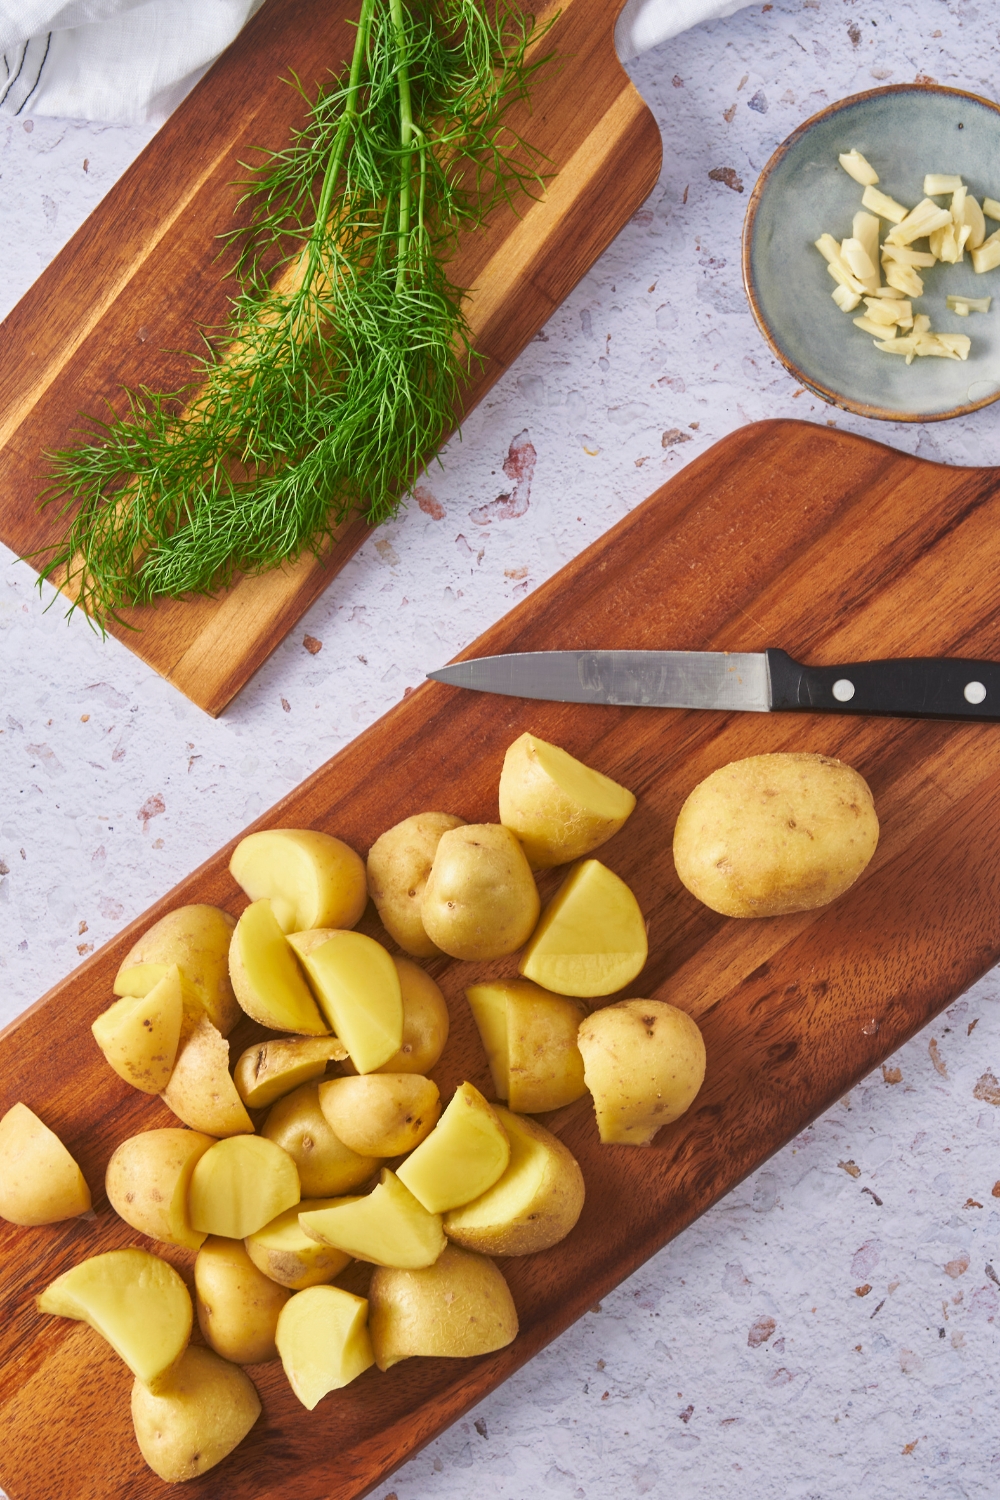 Overhead view of sliced potatoes on a cutting board with a knife on the cutting board and fresh dill on a second cutting board.